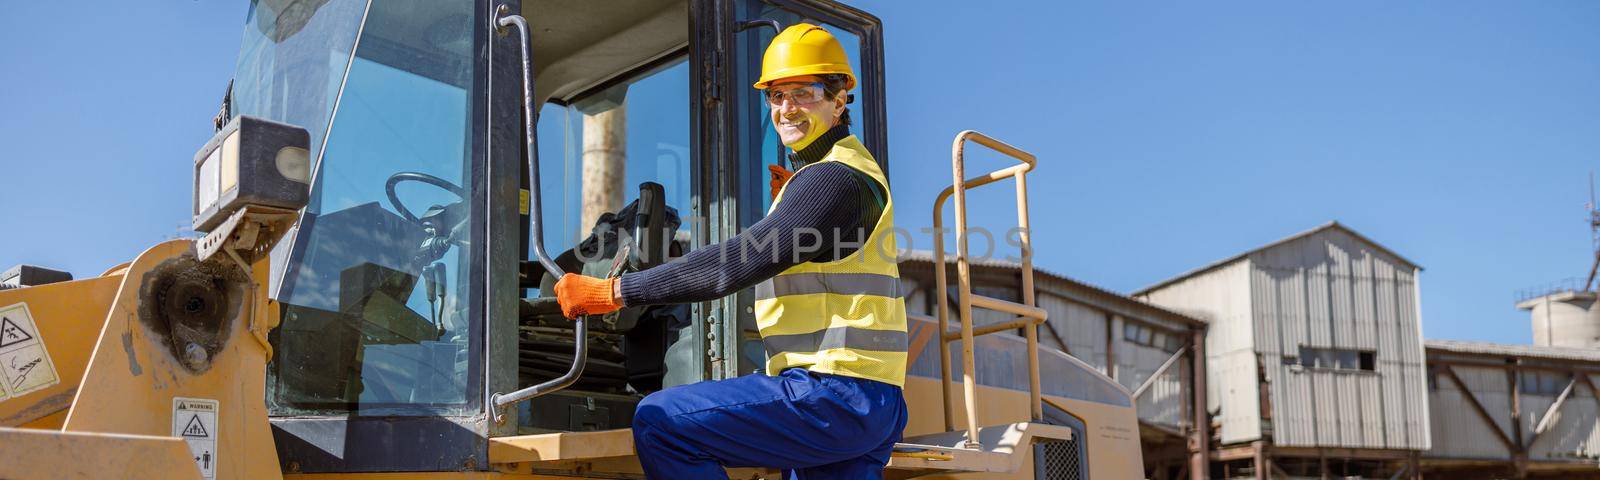 Joyful man factory worker looking at camera and smiling while standing on steps of industrial truck